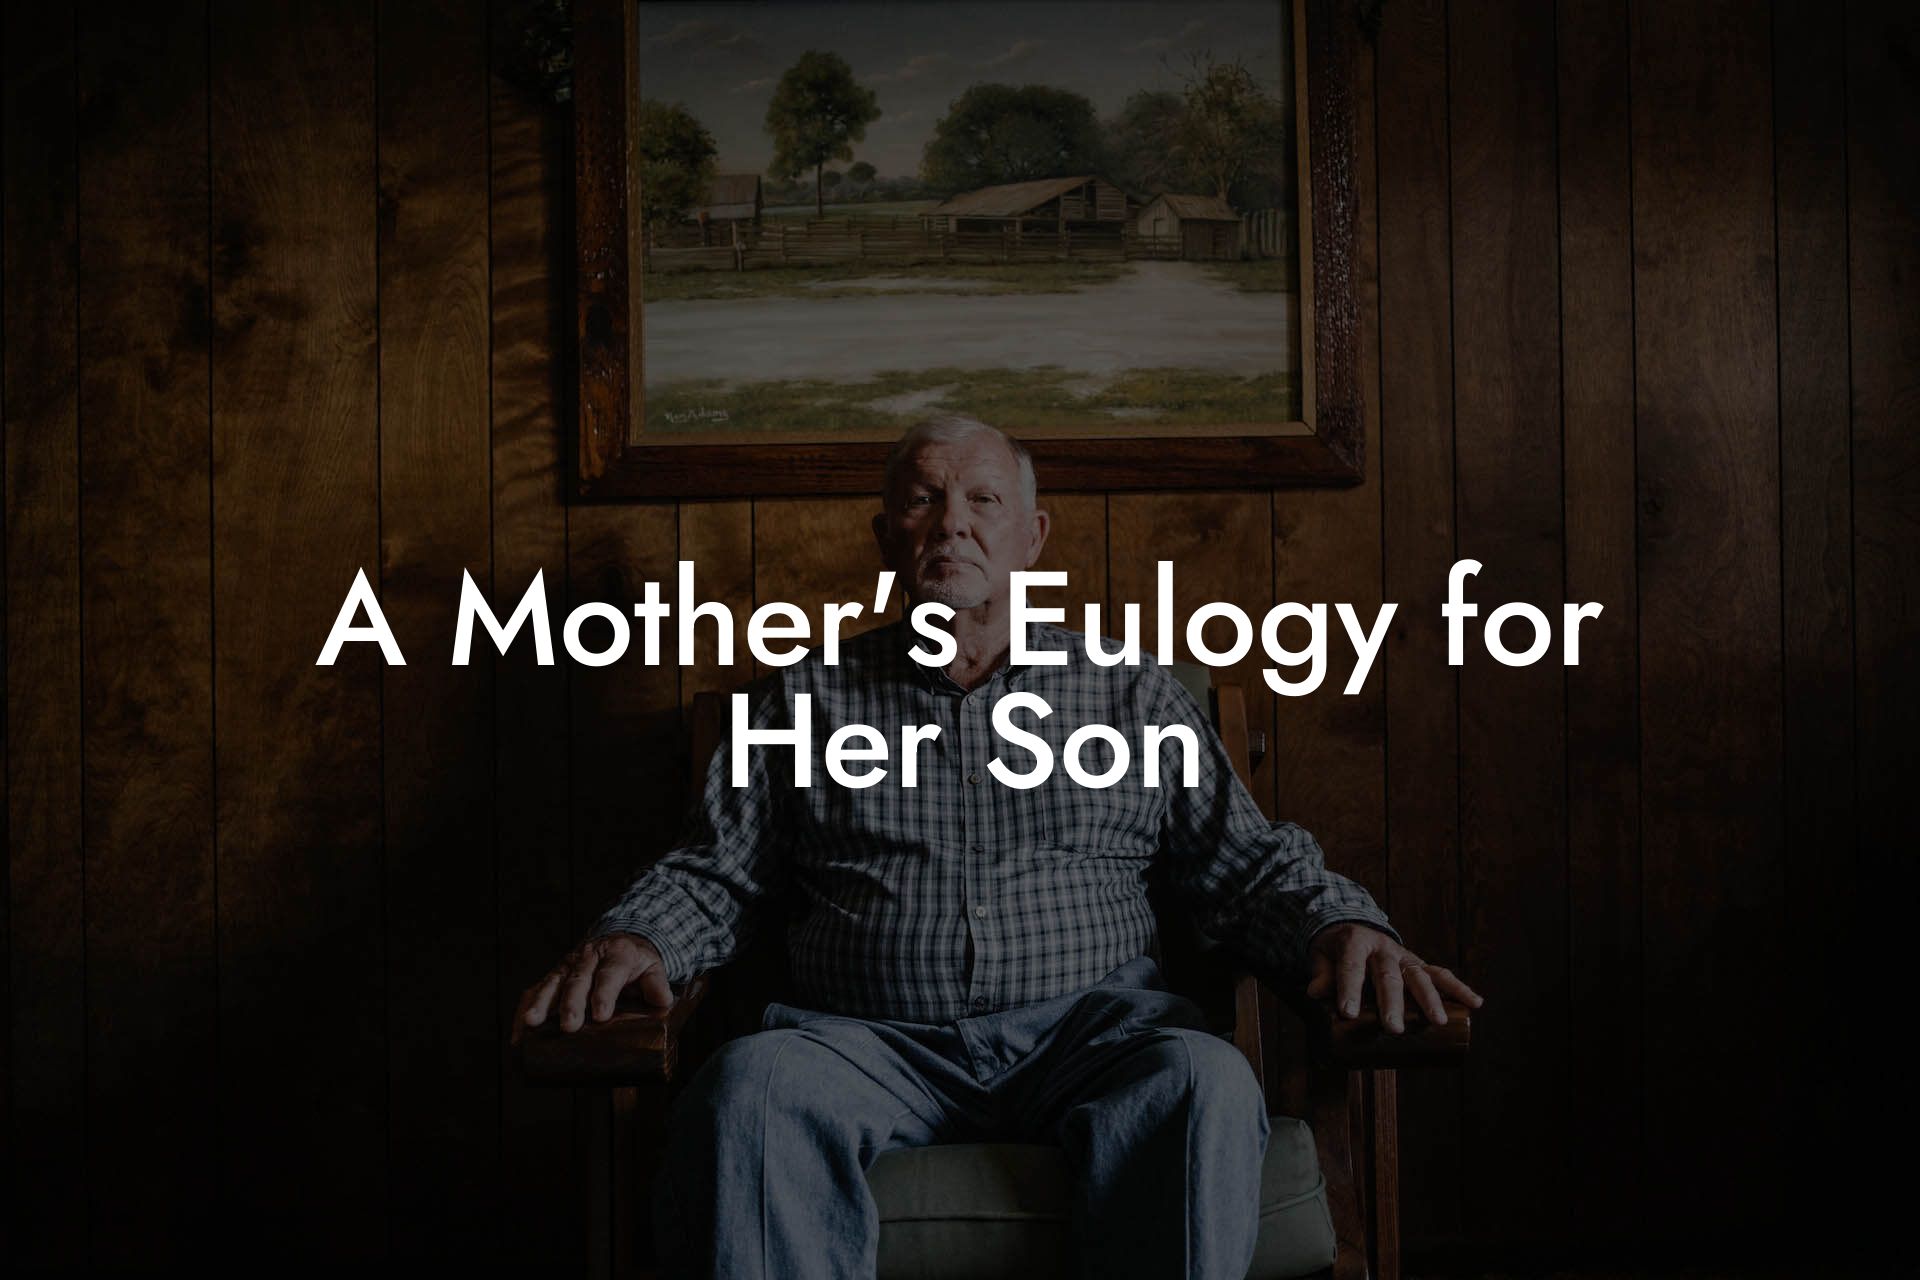 A Mother's Eulogy for Her Son